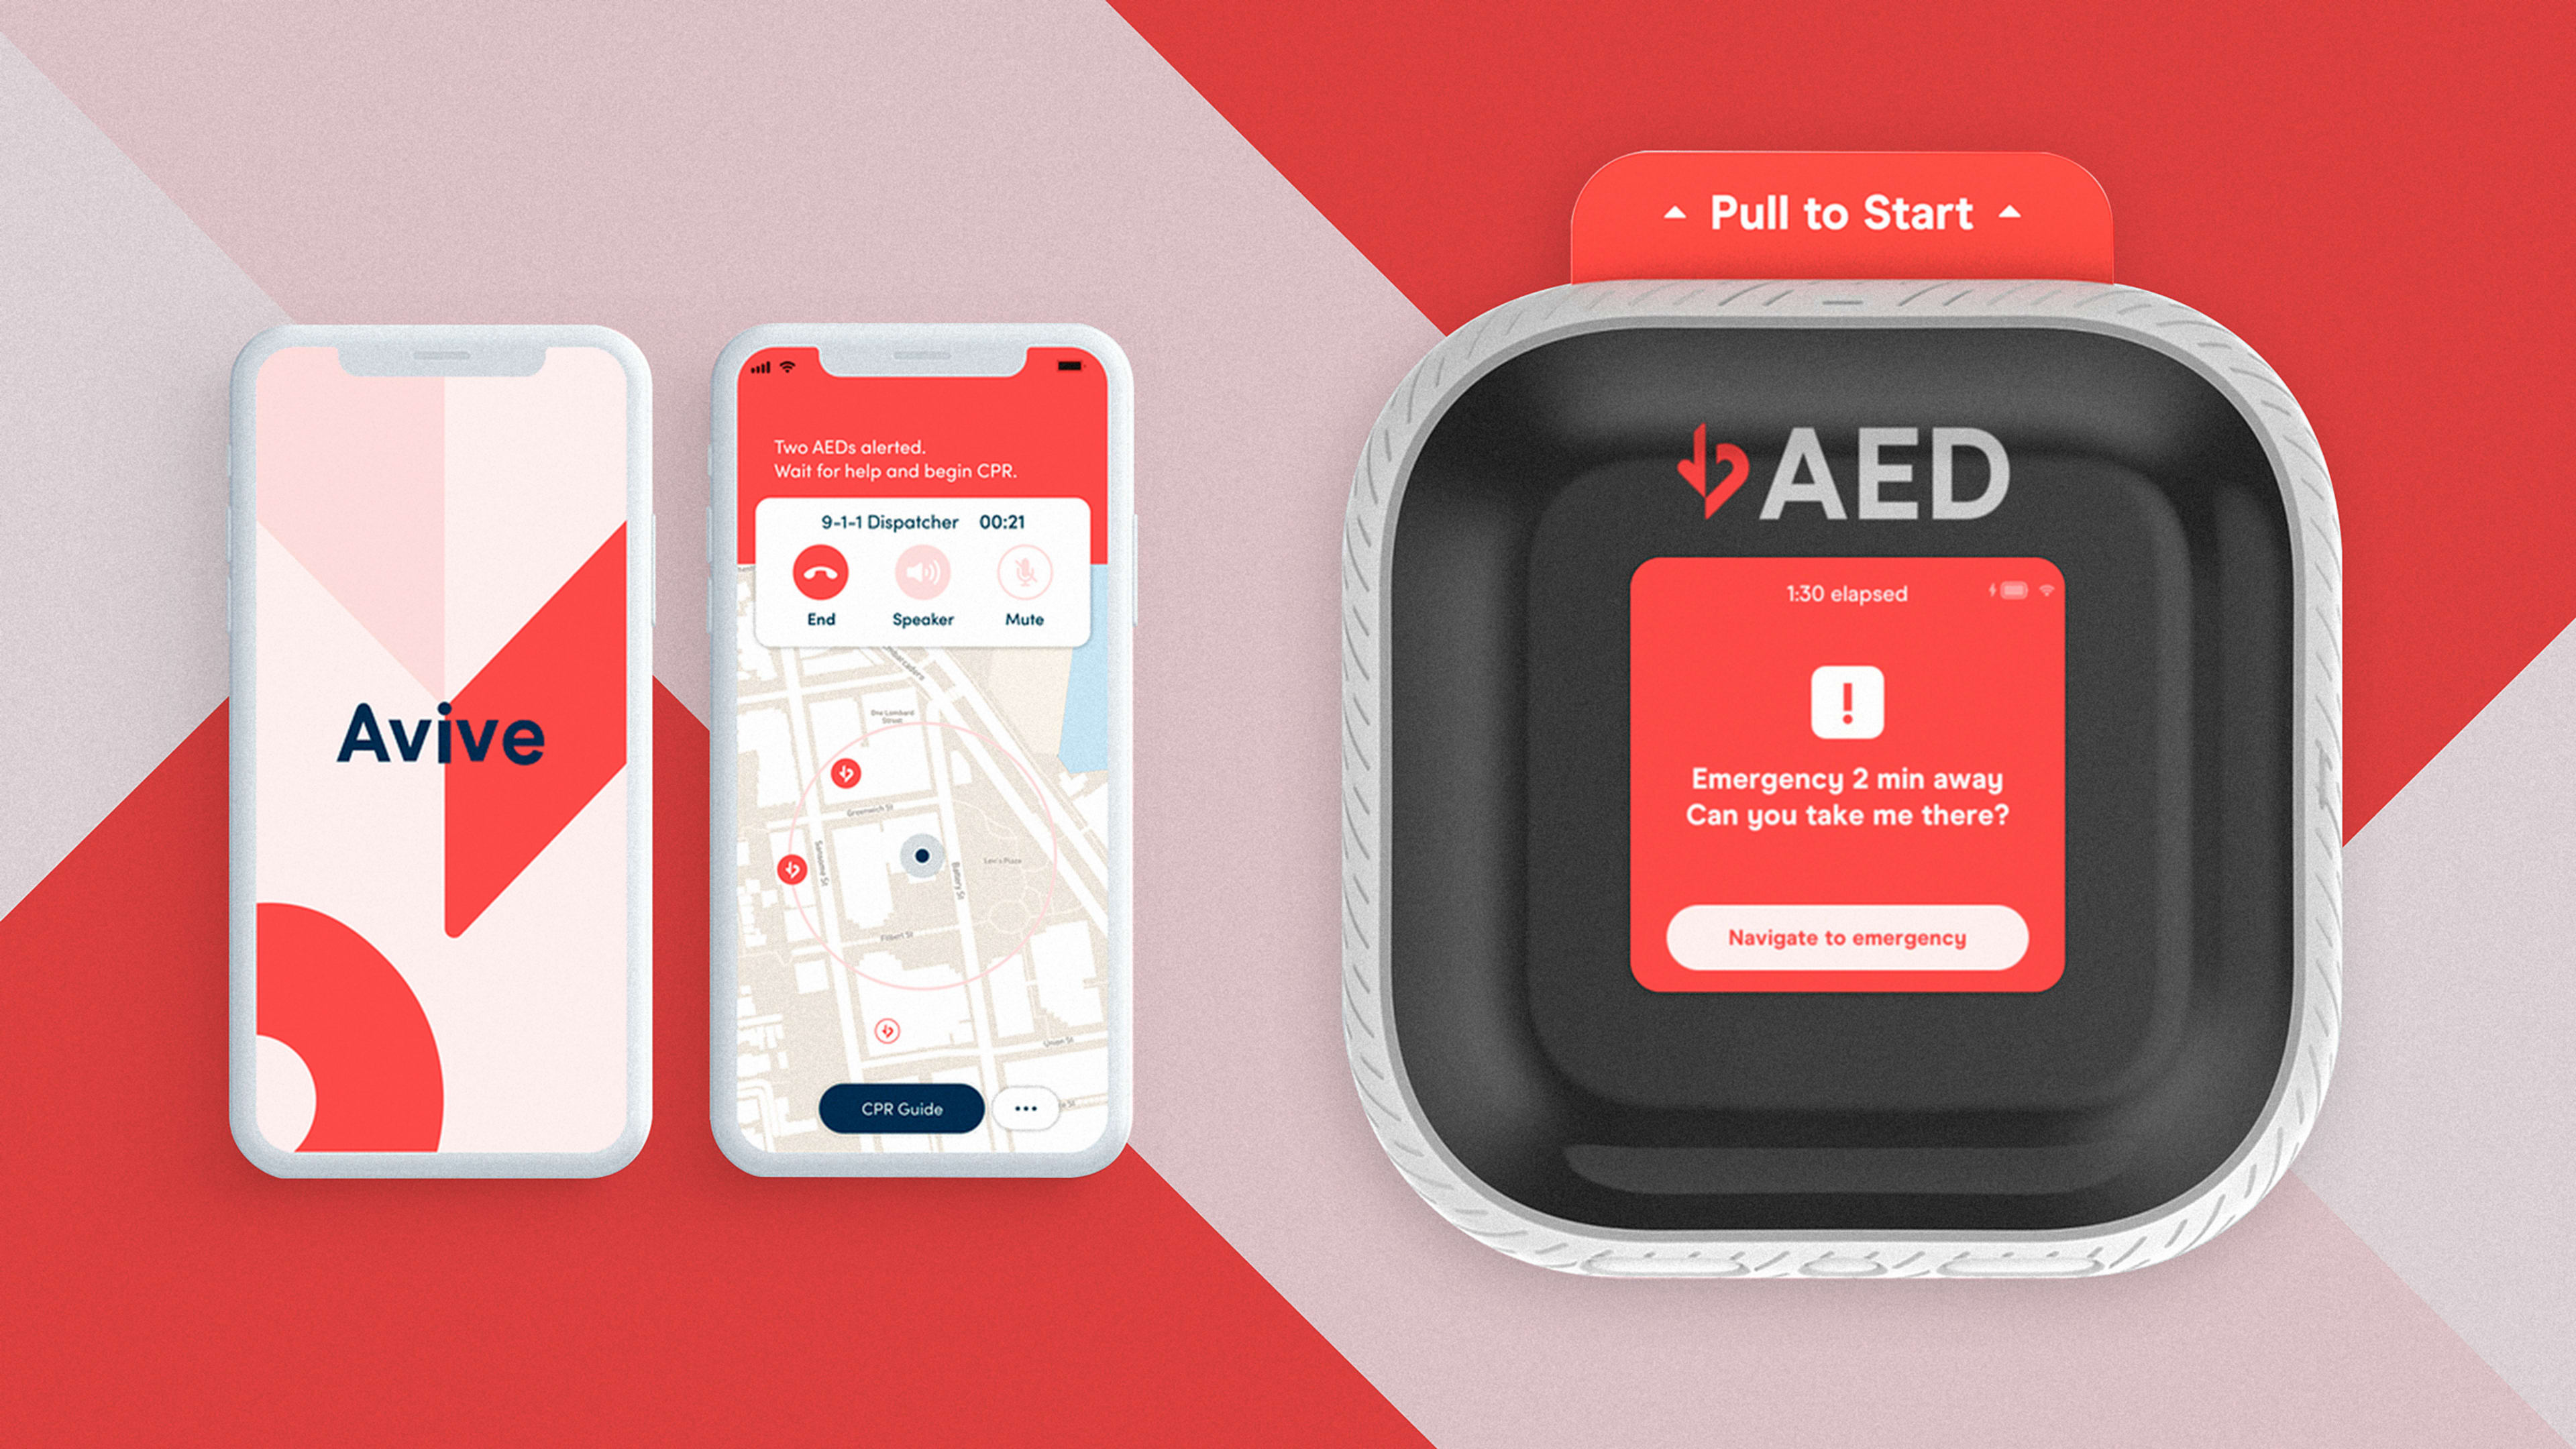 This tiny defibrillator turns your neighborhood into a communal ER